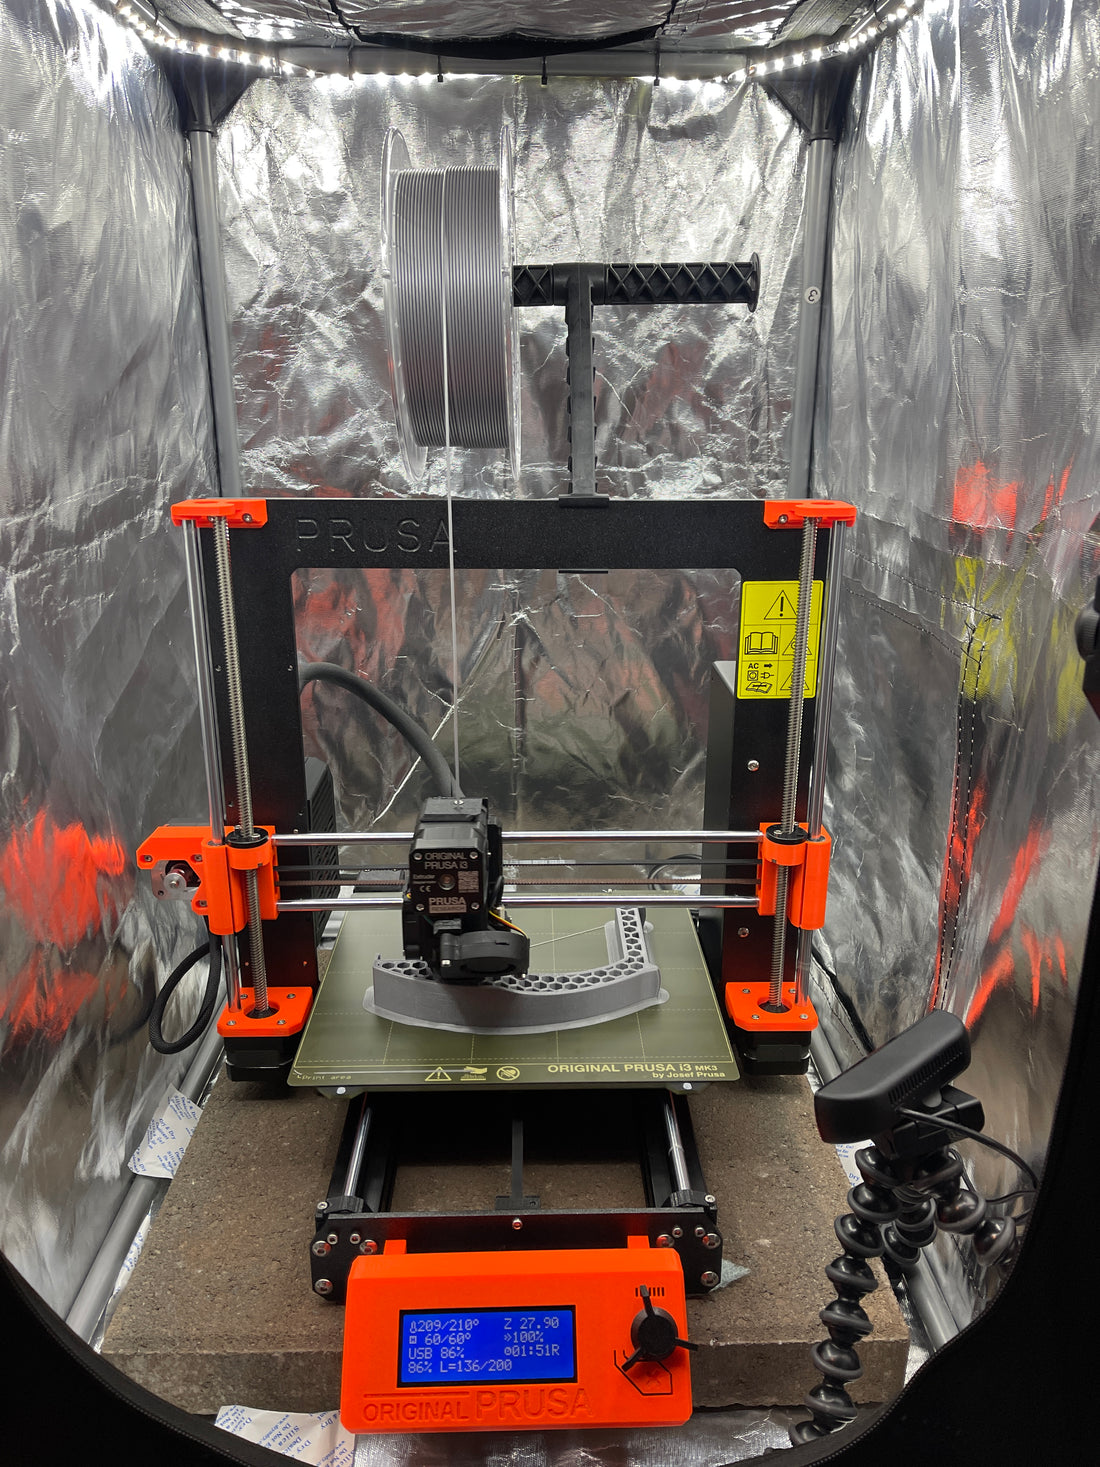 PRUSA VS ENDER - My initial thoughts